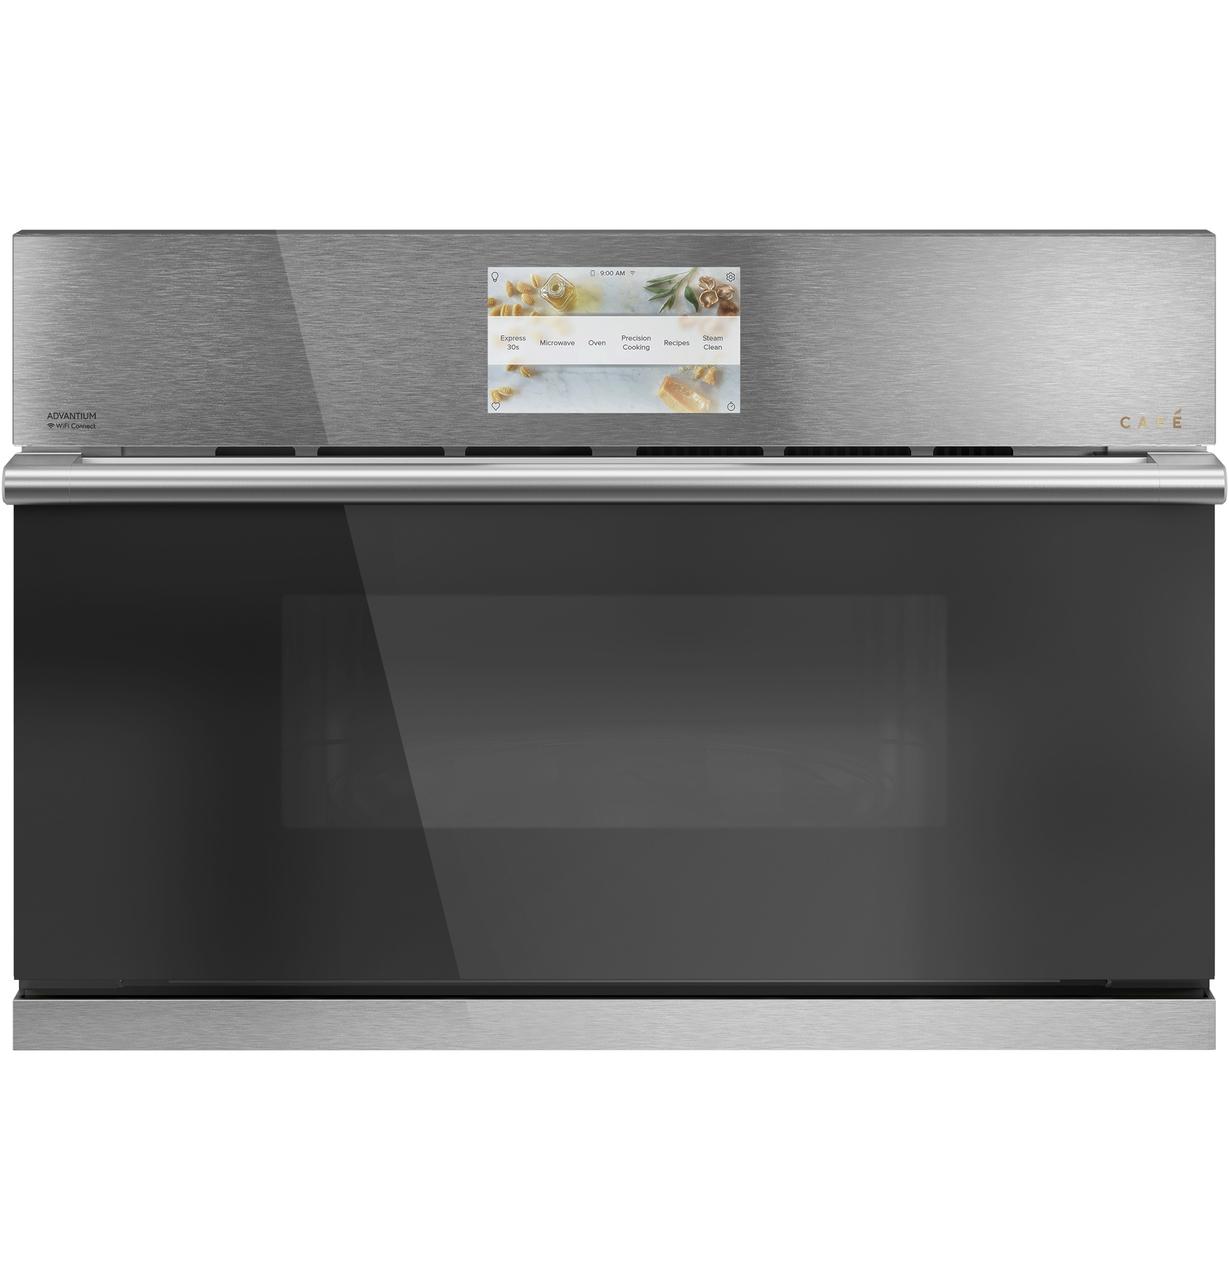 Cafe Caf(eback)™ 30" Smart Five in One Oven with 120V Advantium® Technology in Platinum Glass